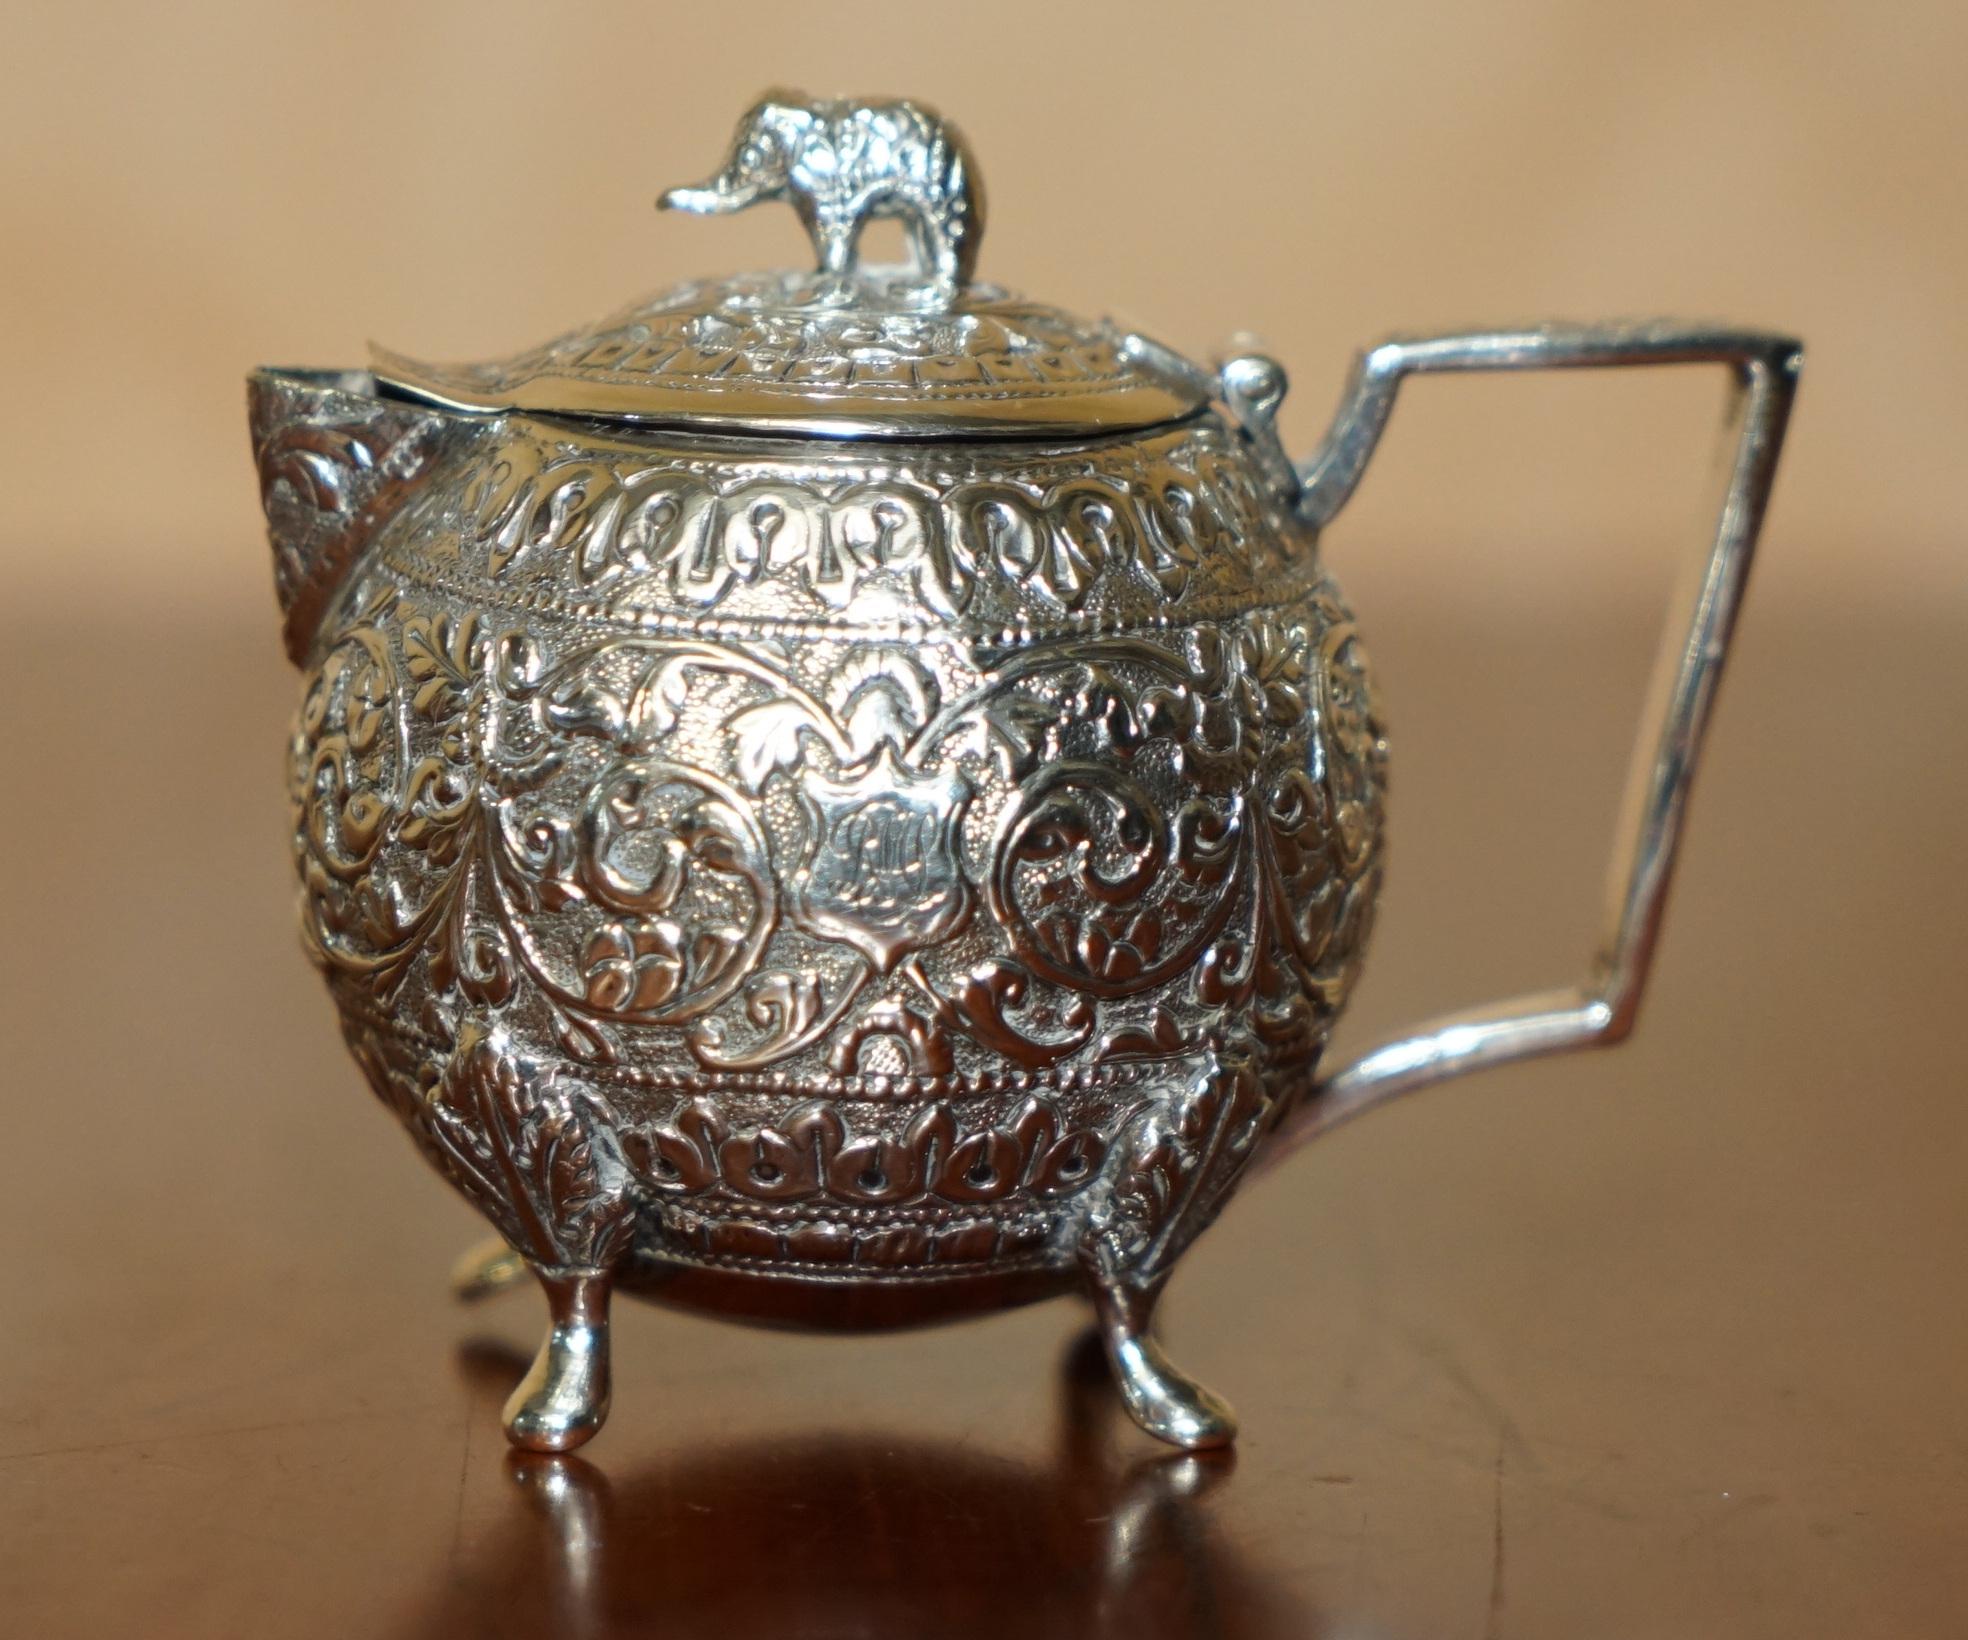 ANTIQUE INDIAN ELEPHANT COLONIAL SOLiD SILBER TEA SERVICE OOMERSI MAWJI & SONS im Angebot 10